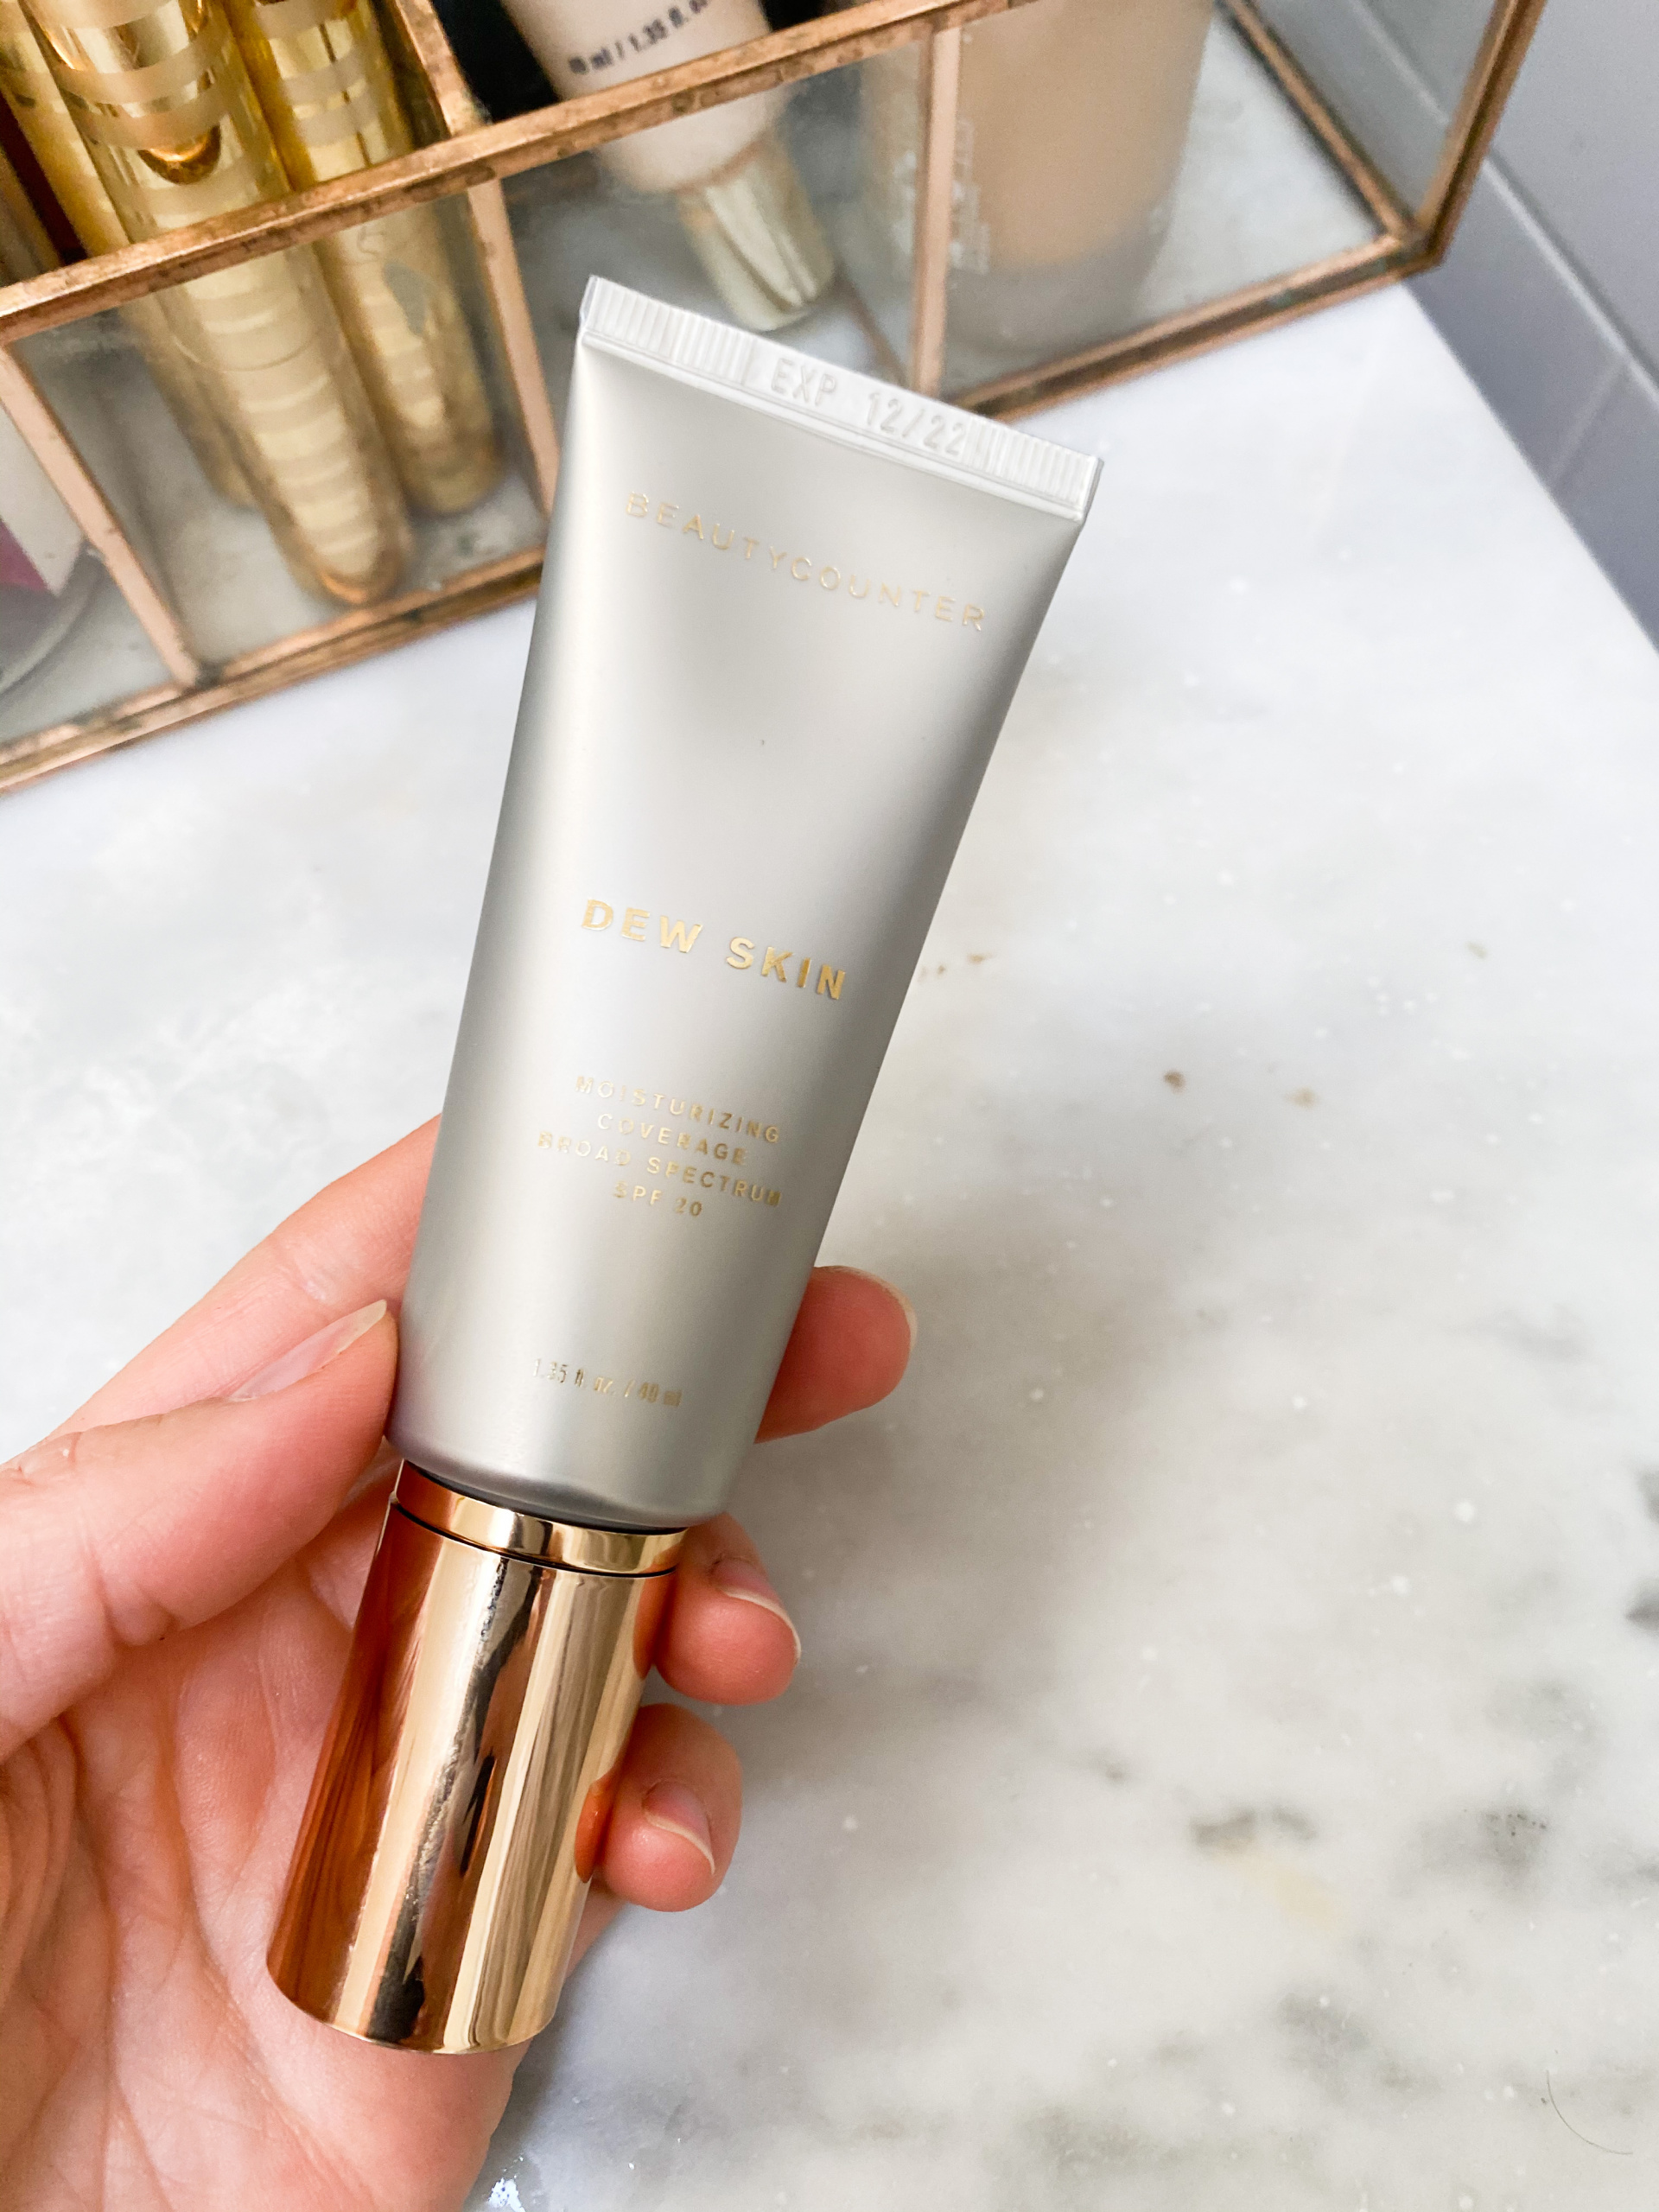 Beautycounter dew skin tinted moisturizer review, beautycounter at Sephora, clean beauty makeup at Sephora 